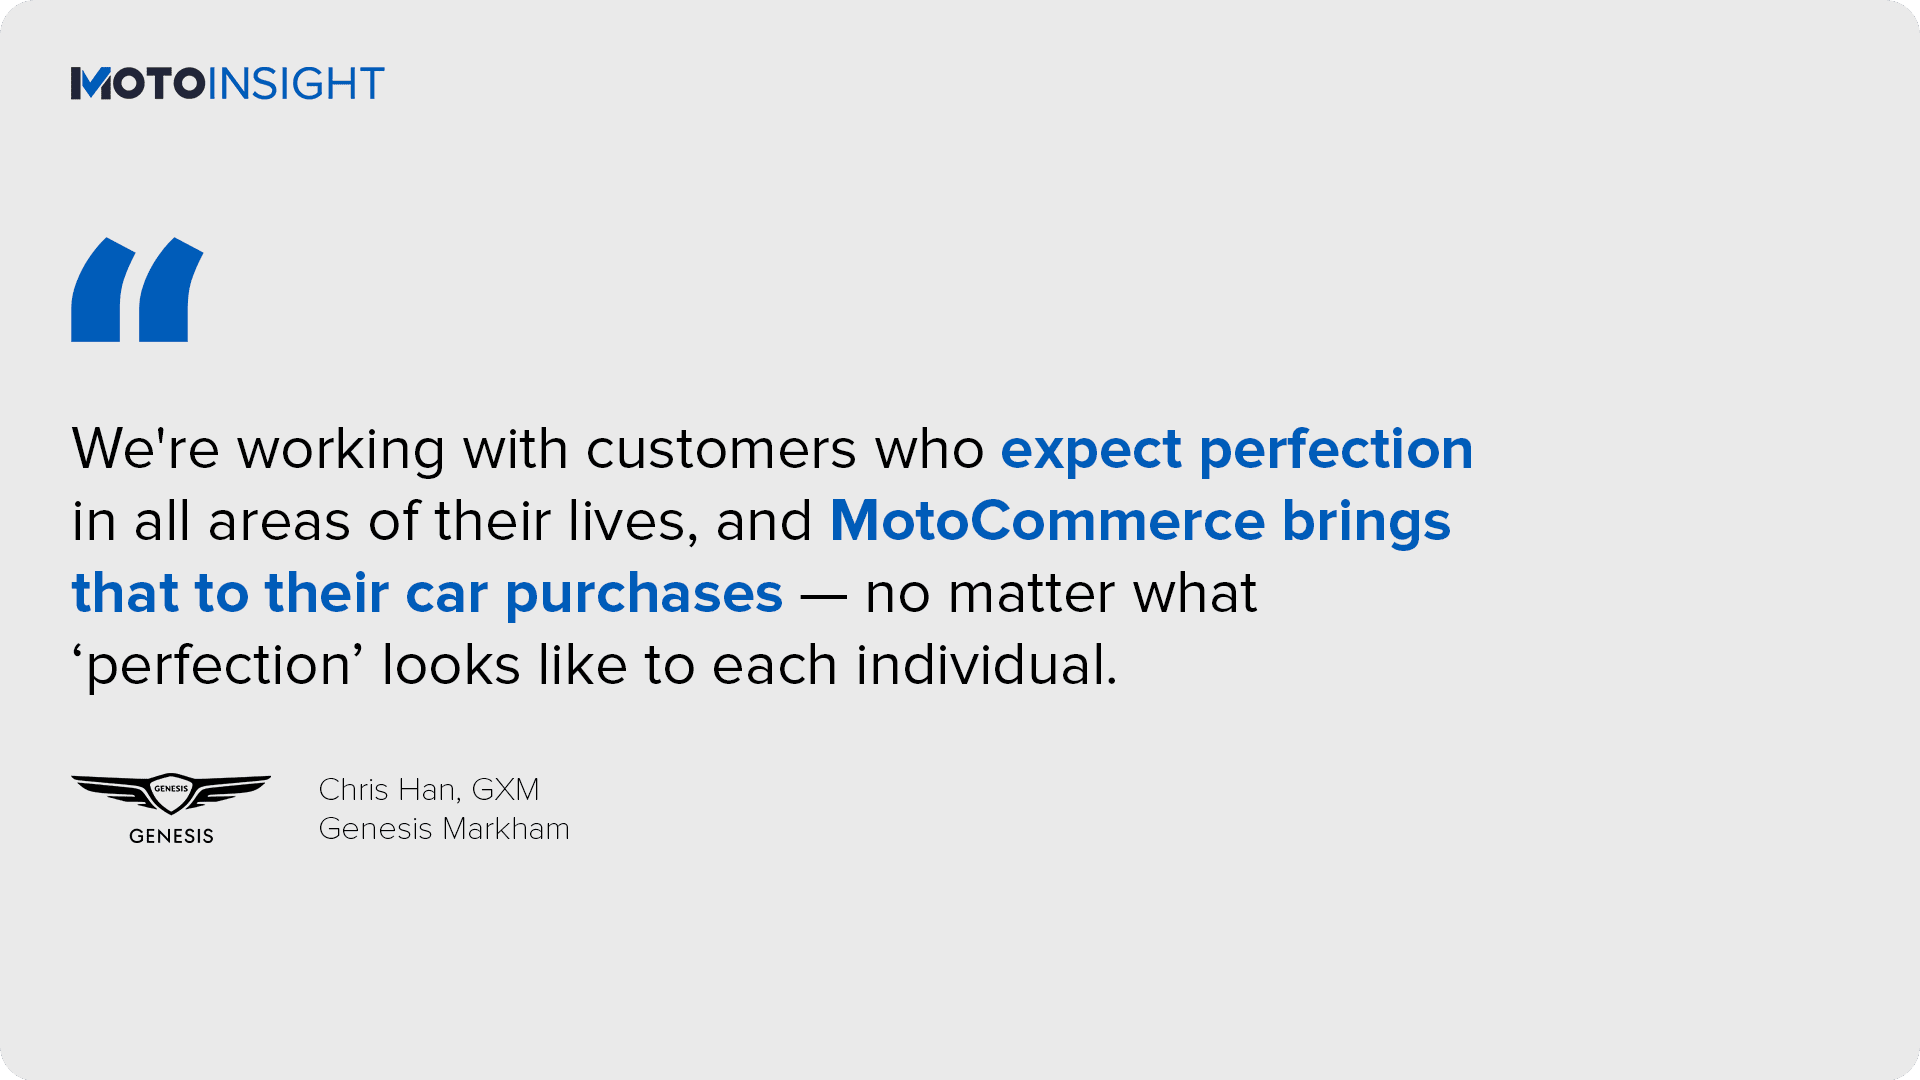 We're working with customers who expect perfection in all areas of their lives, and MotoCommerce brings that to their car purchases — no matter what ‘perfection’ looks like to each individual.